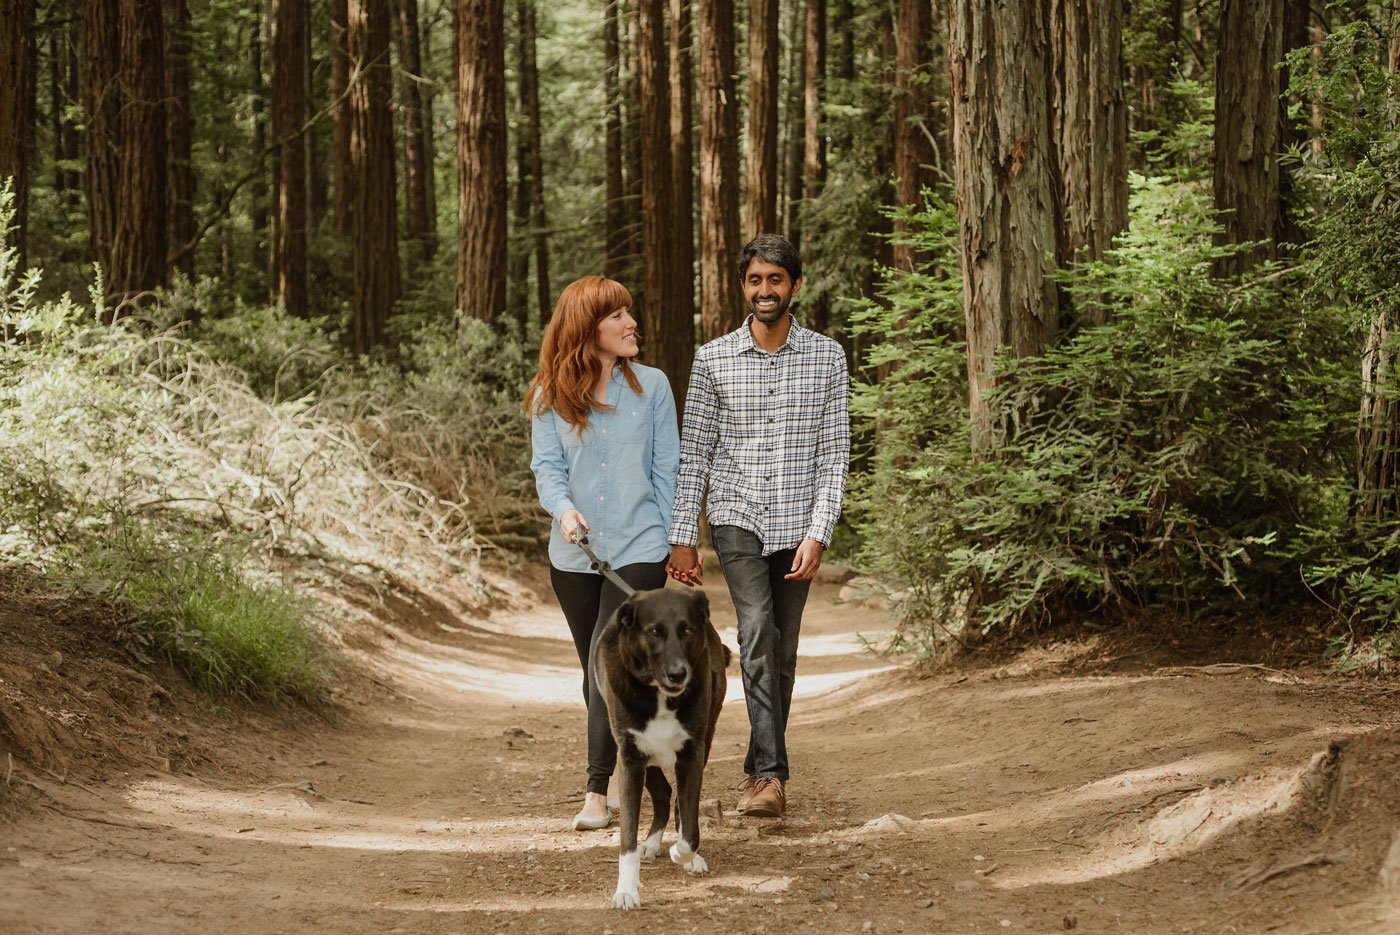 A white woman with red hair and bangs and an Indian man walk their large dog in Joaquin Miller, holding hands and smiling.